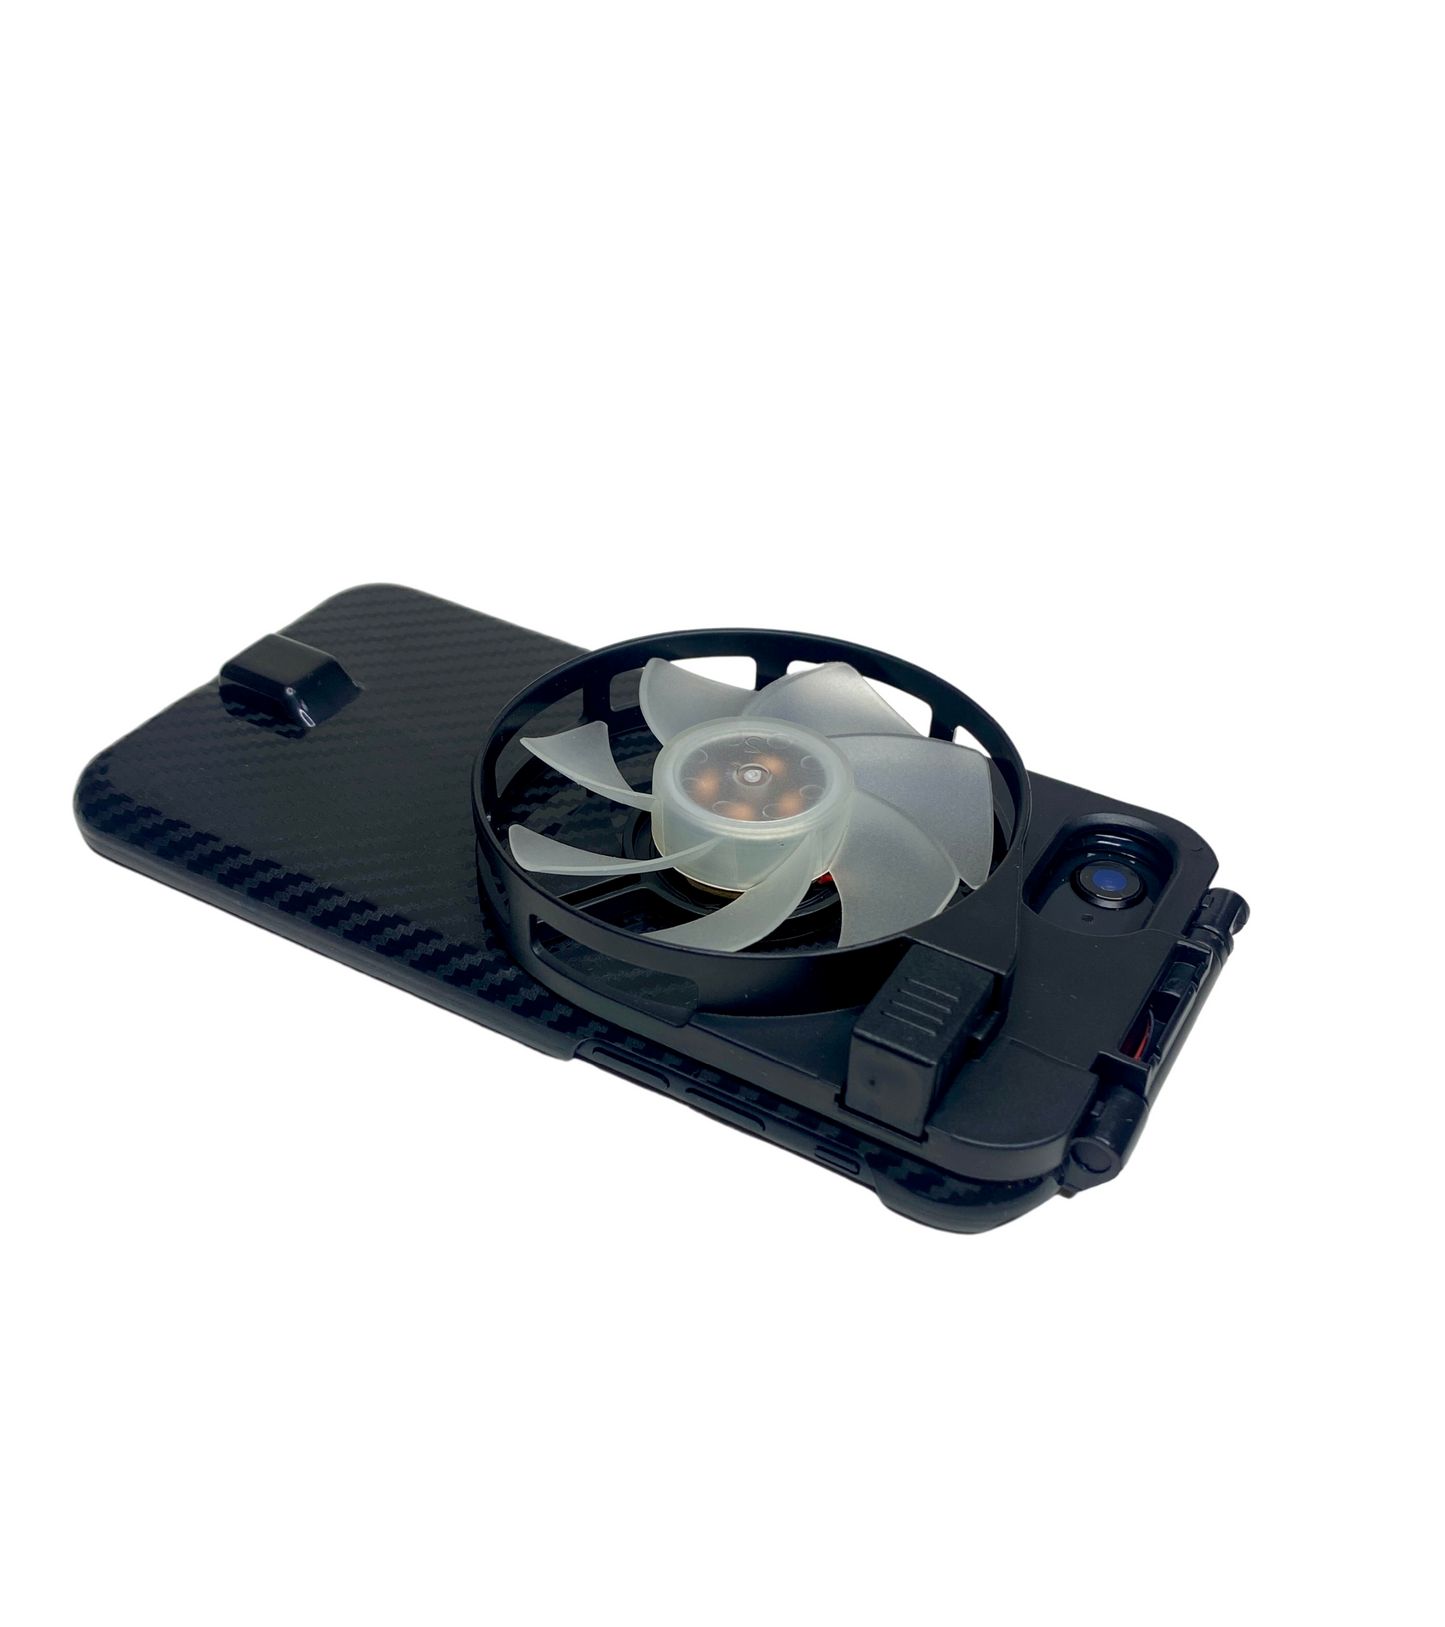 KEEP COOL CASES Black iPhone 8 and iPhone SE Case With Fan